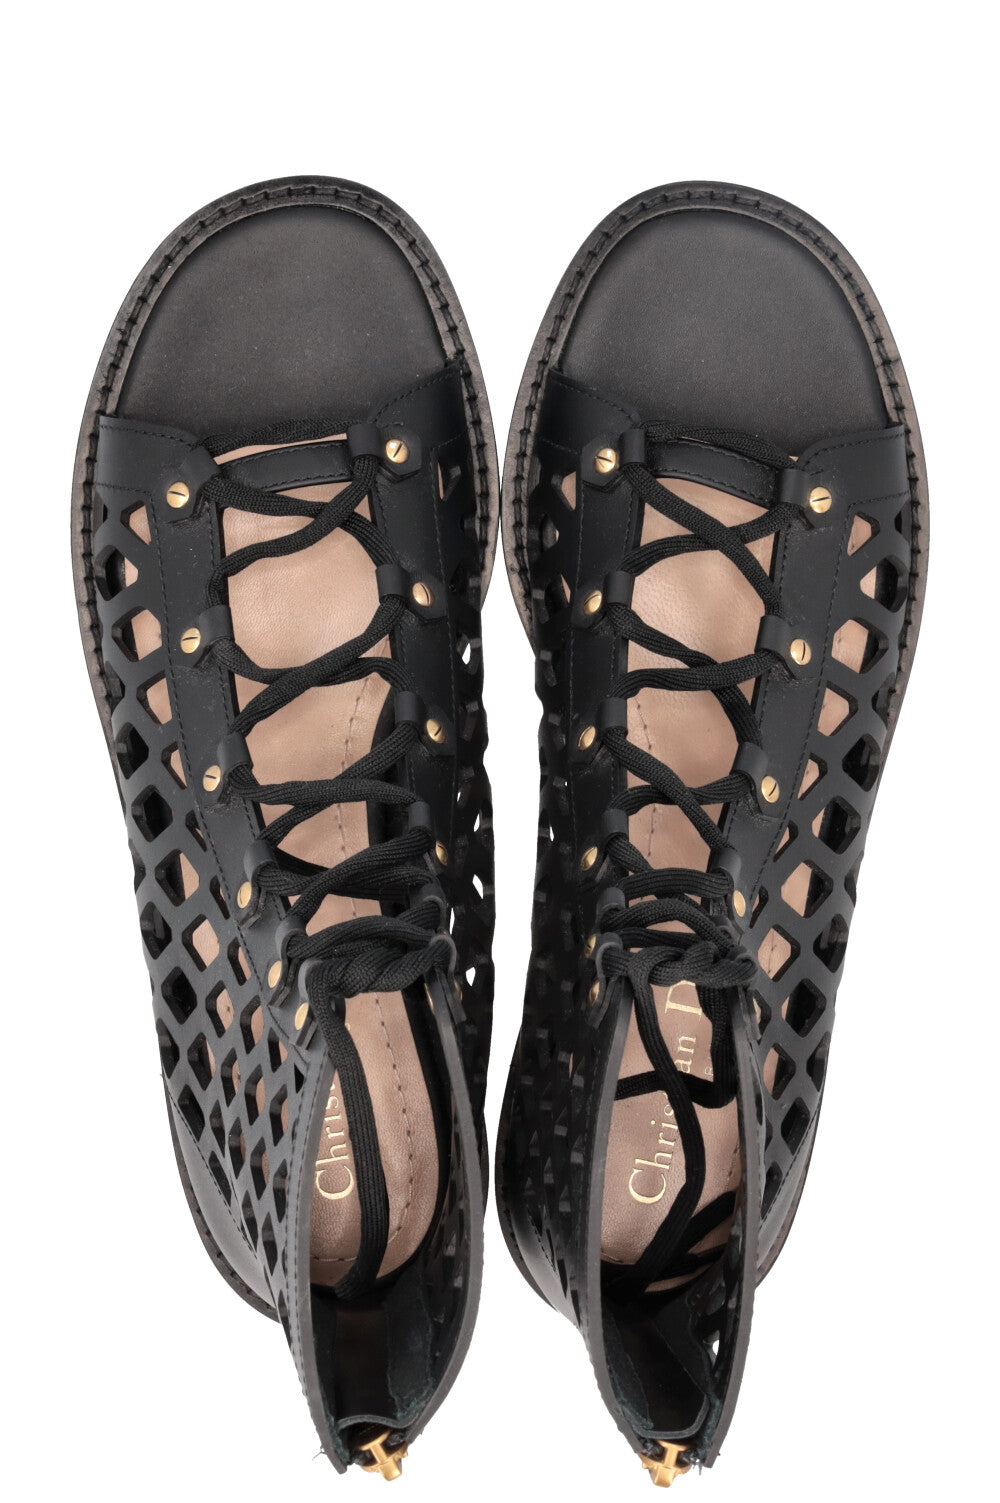 CHRISTIAN DIOR Cage Sandals Leather Black